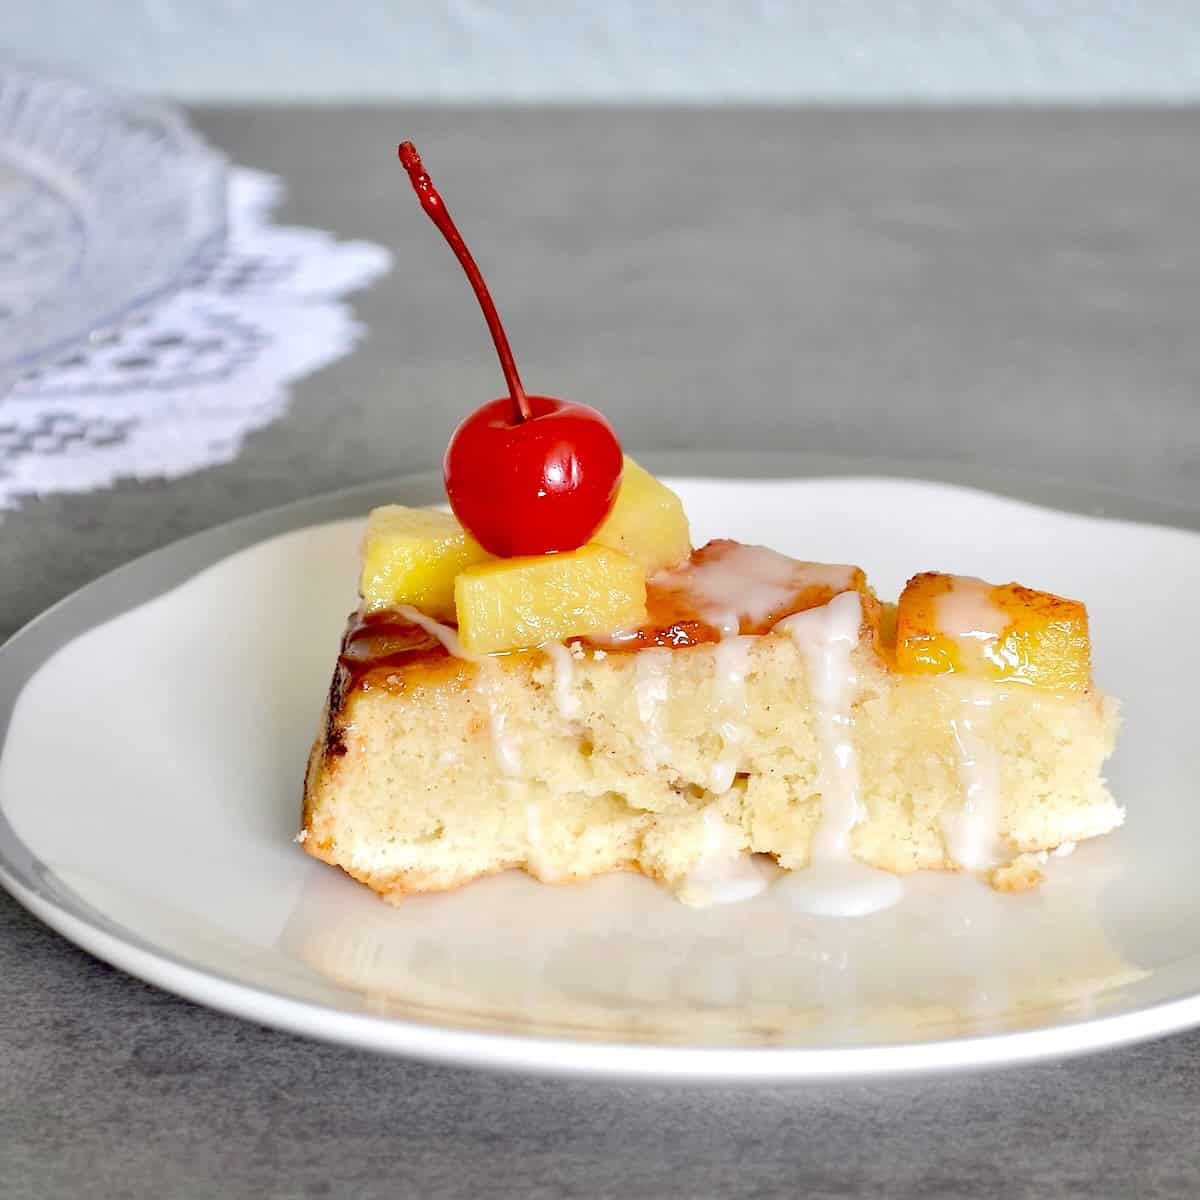 Slice of cake with pineapples and cherries